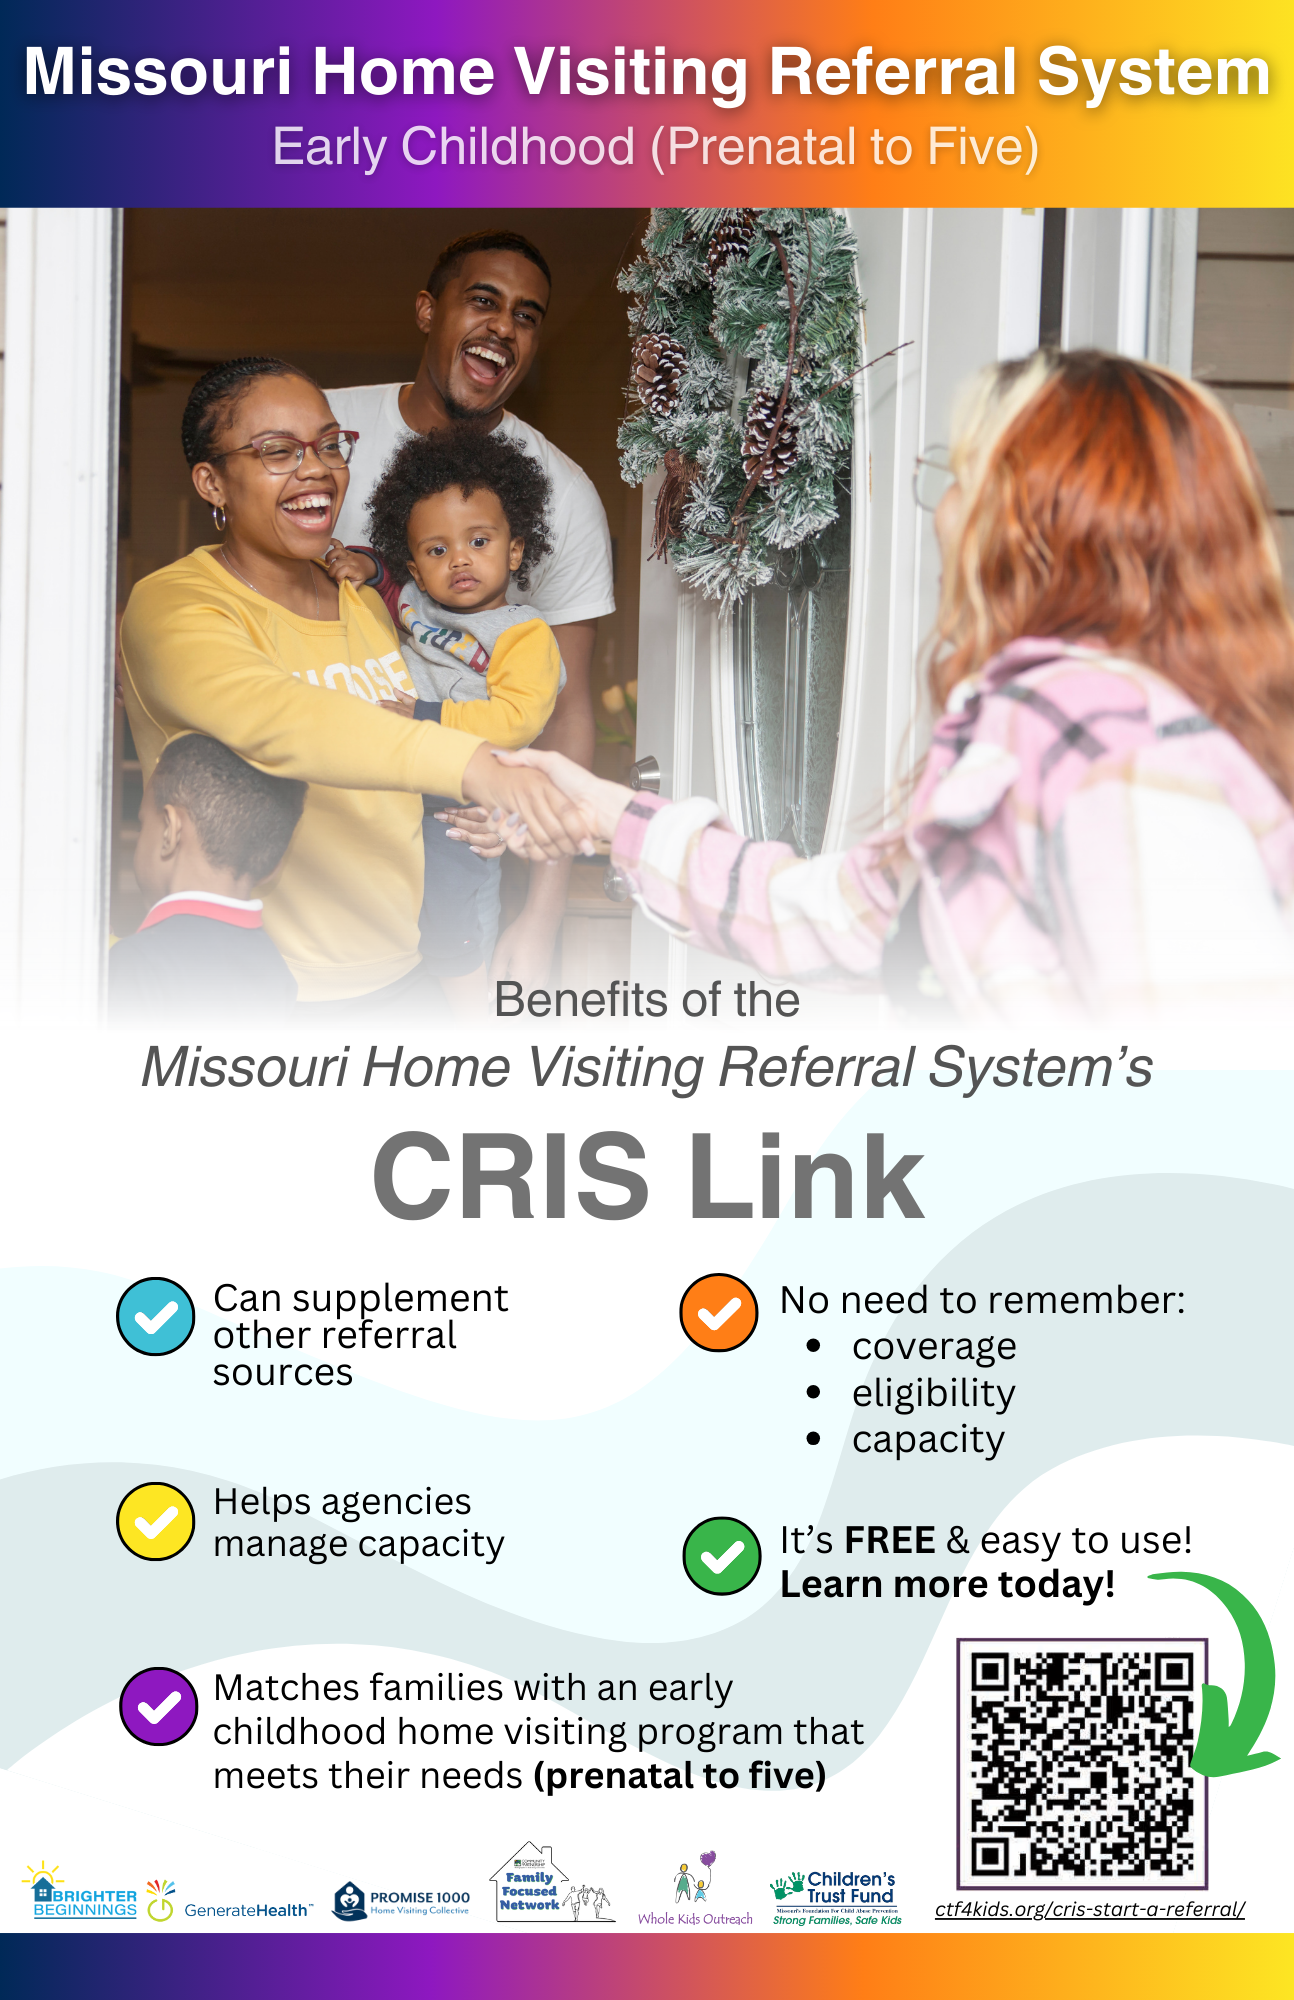 Missouri Home Visiting Referral System Poster